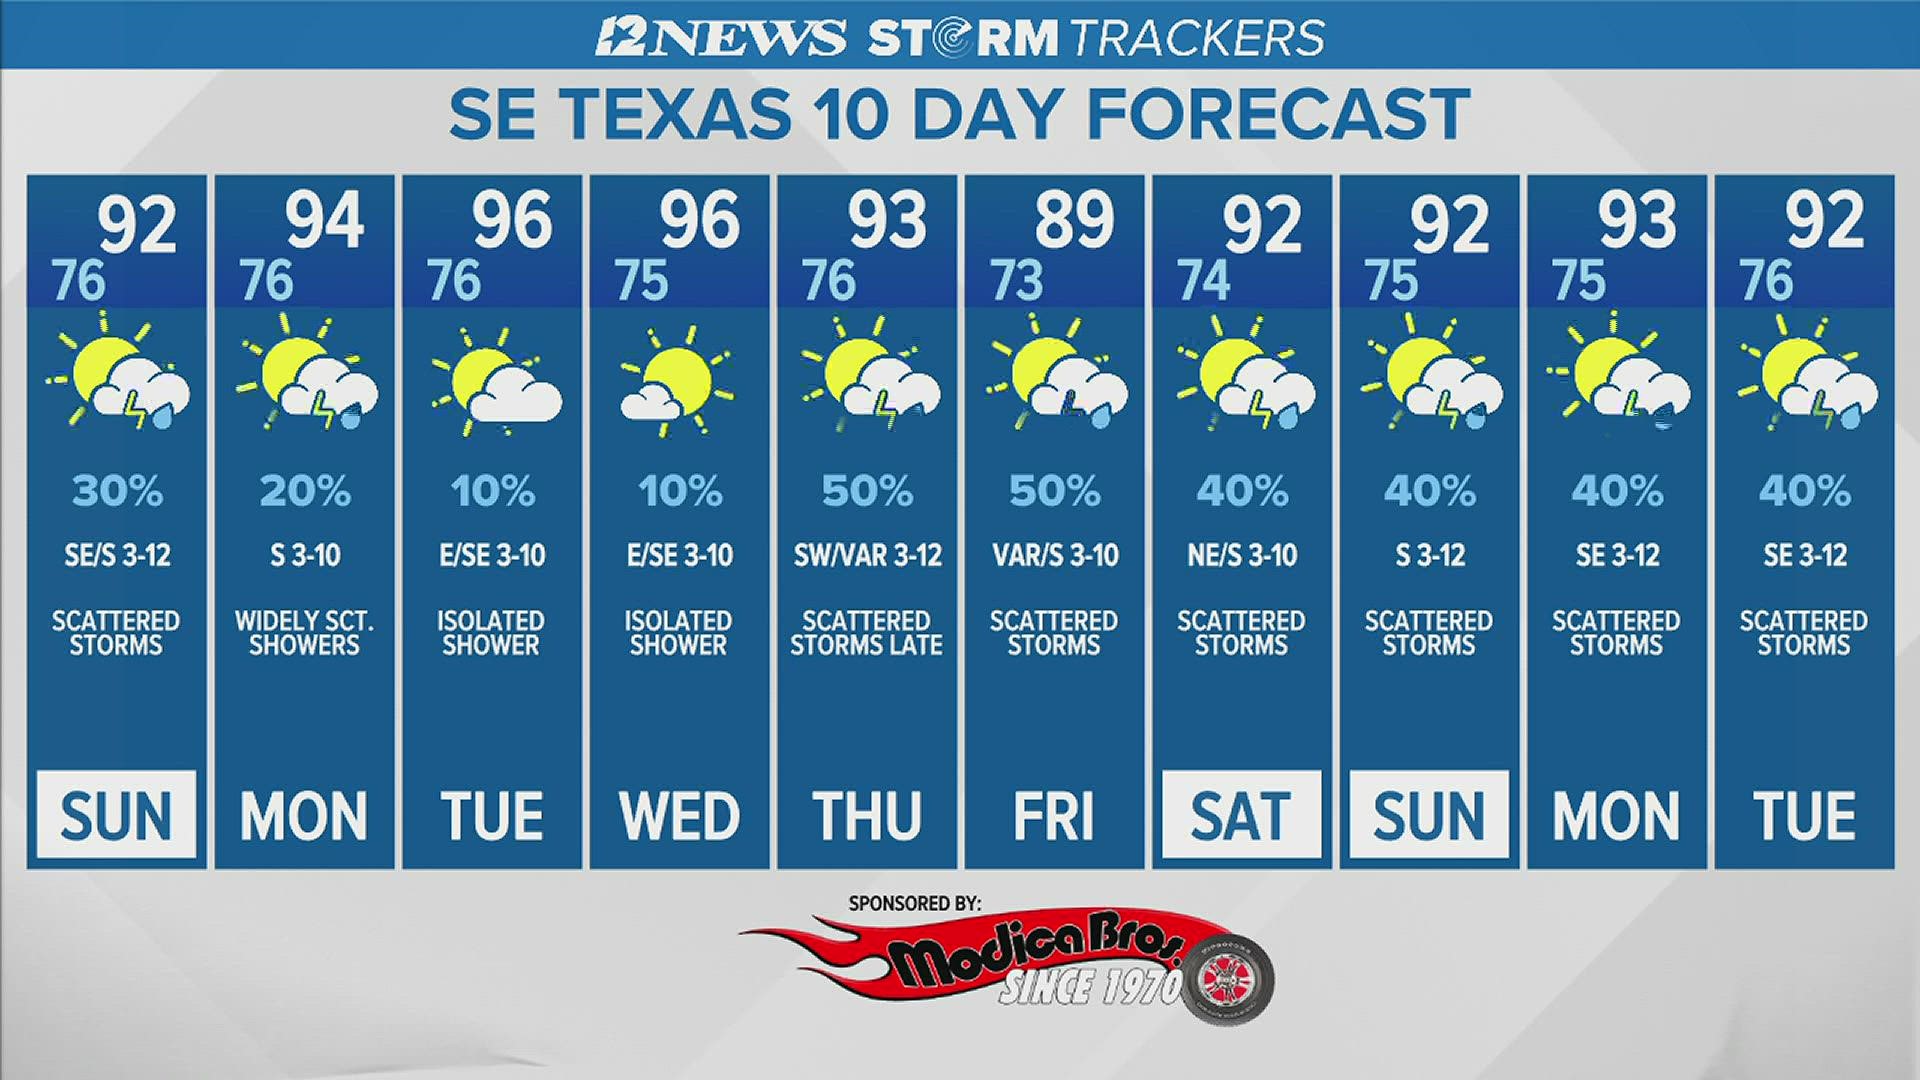 On Monday, Tuesday and Wednesday, slim rain chances are forecast with highs inching upwards through the middle 90s.